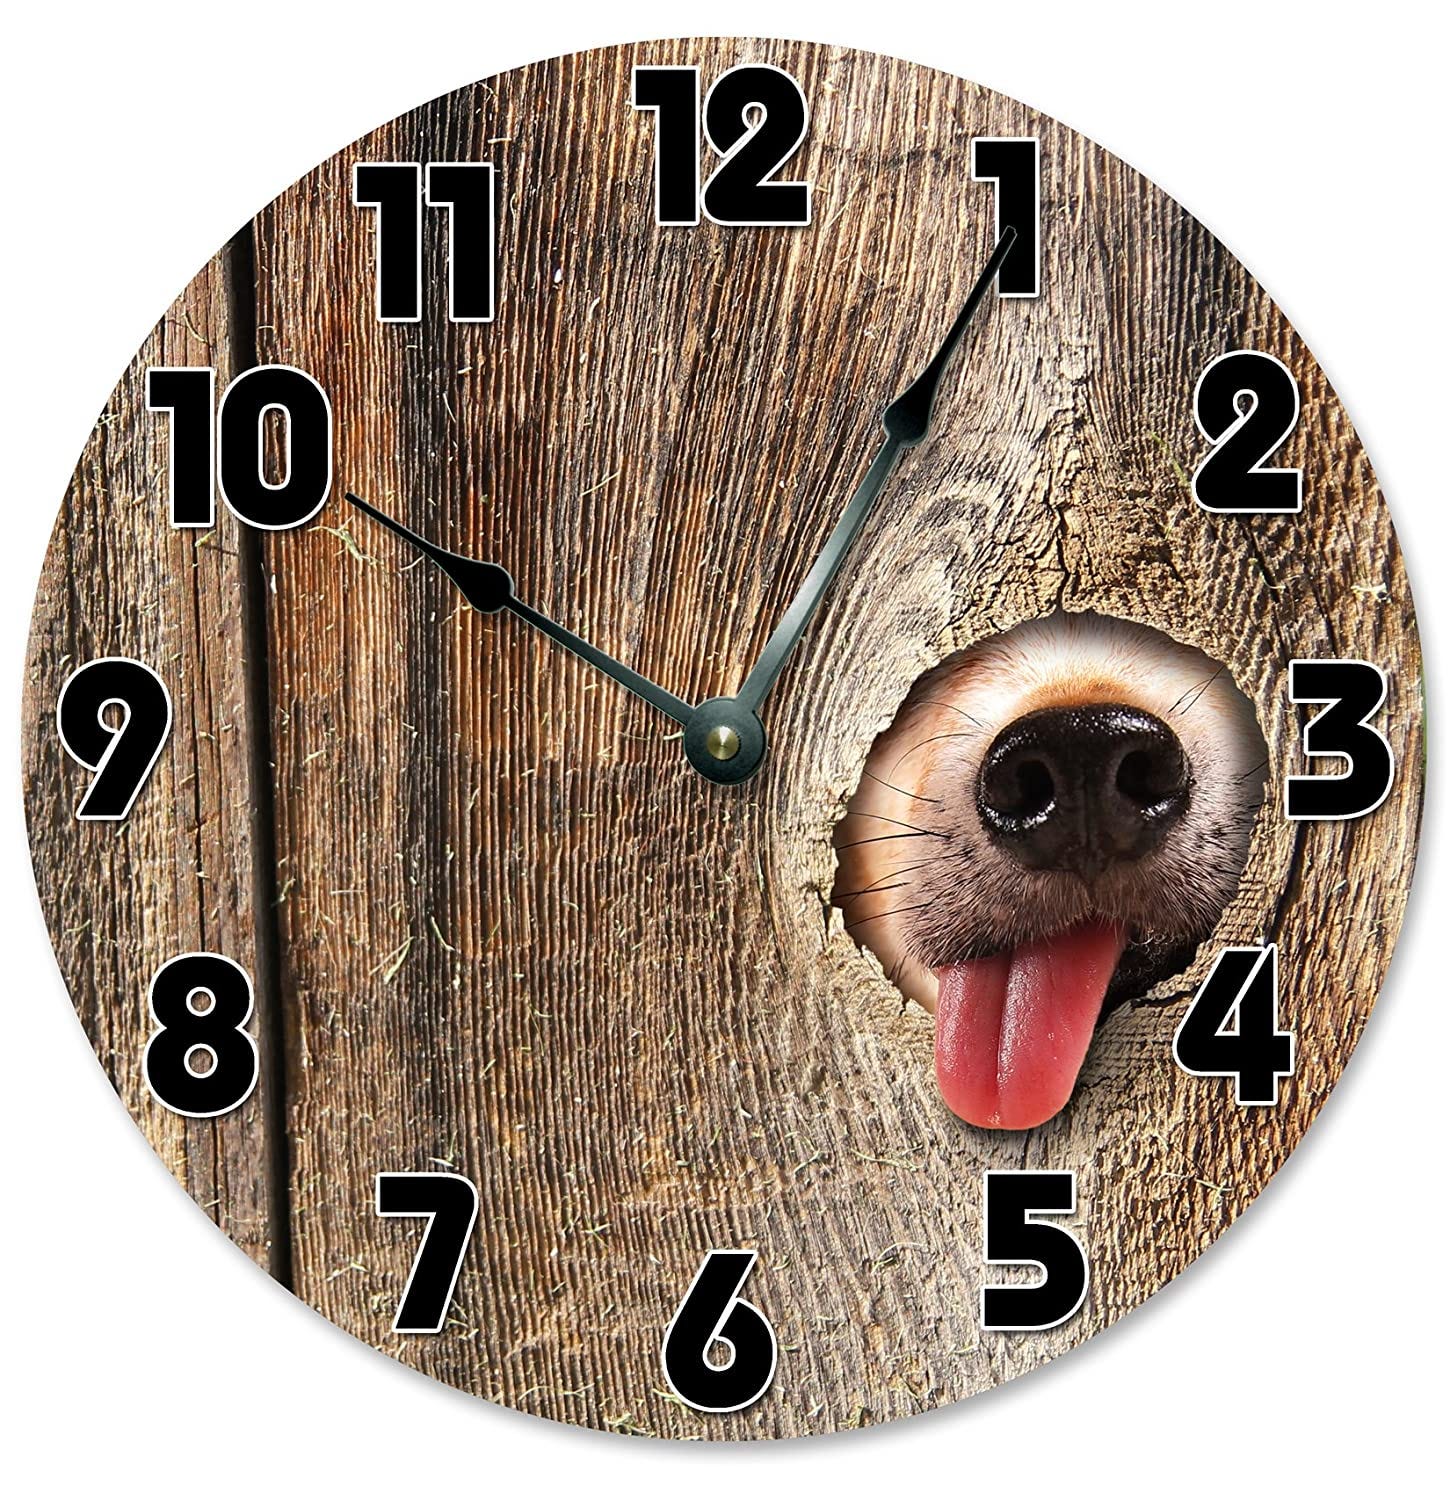 Doggone Dog Wall Clocks Show Our Love For Our Best Furry Buddies